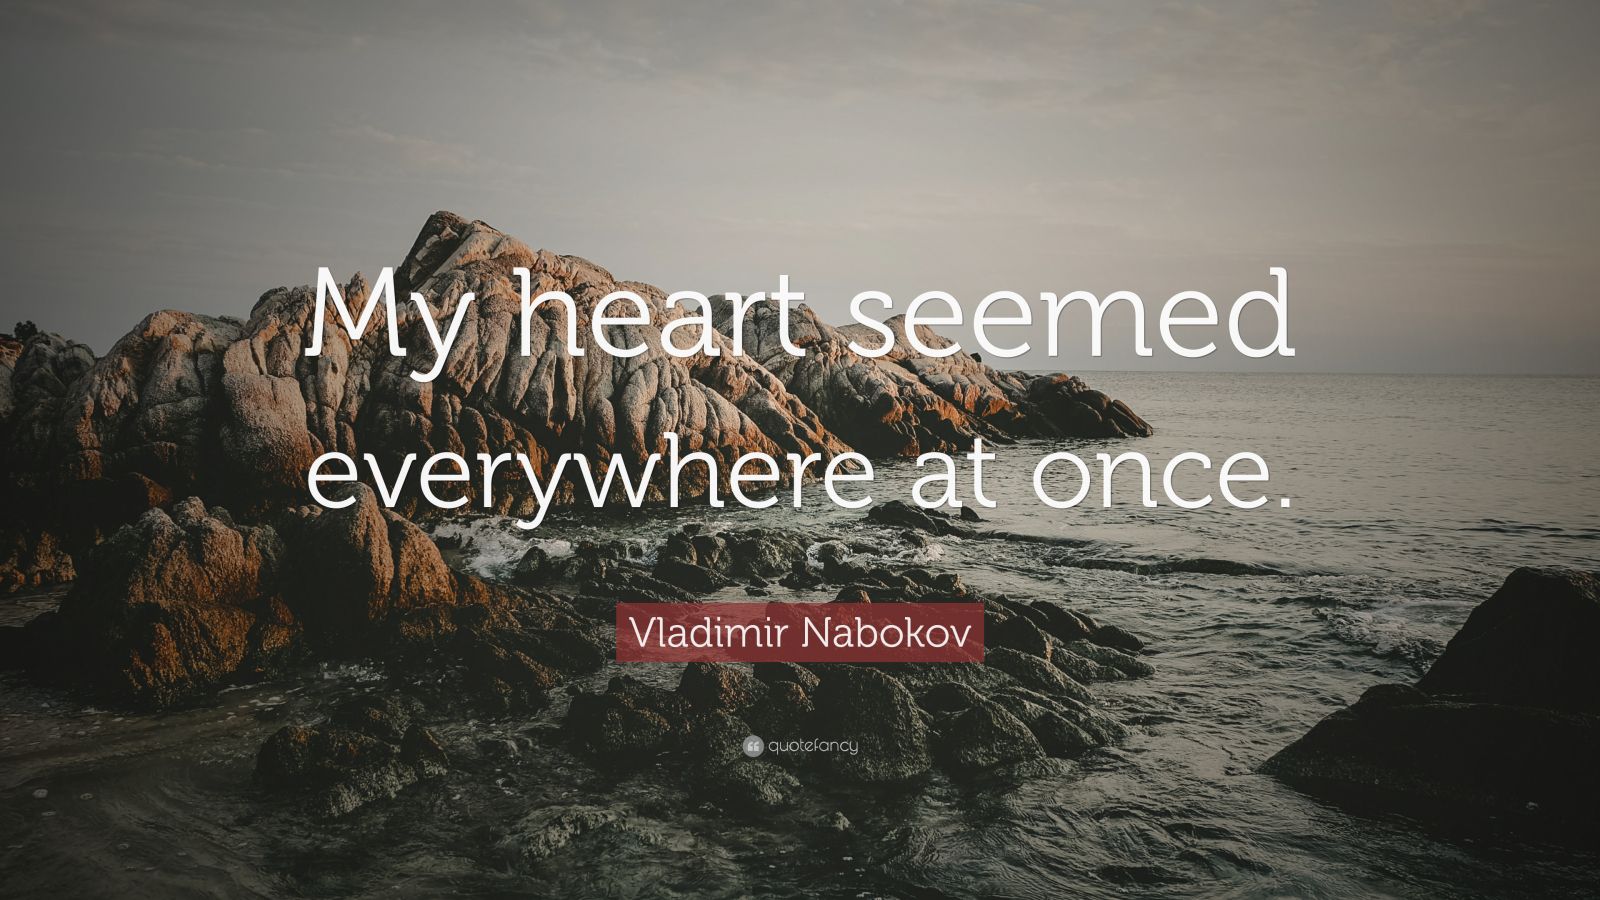 Vladimir Nabokov Quote “my Heart Seemed Everywhere At Once”